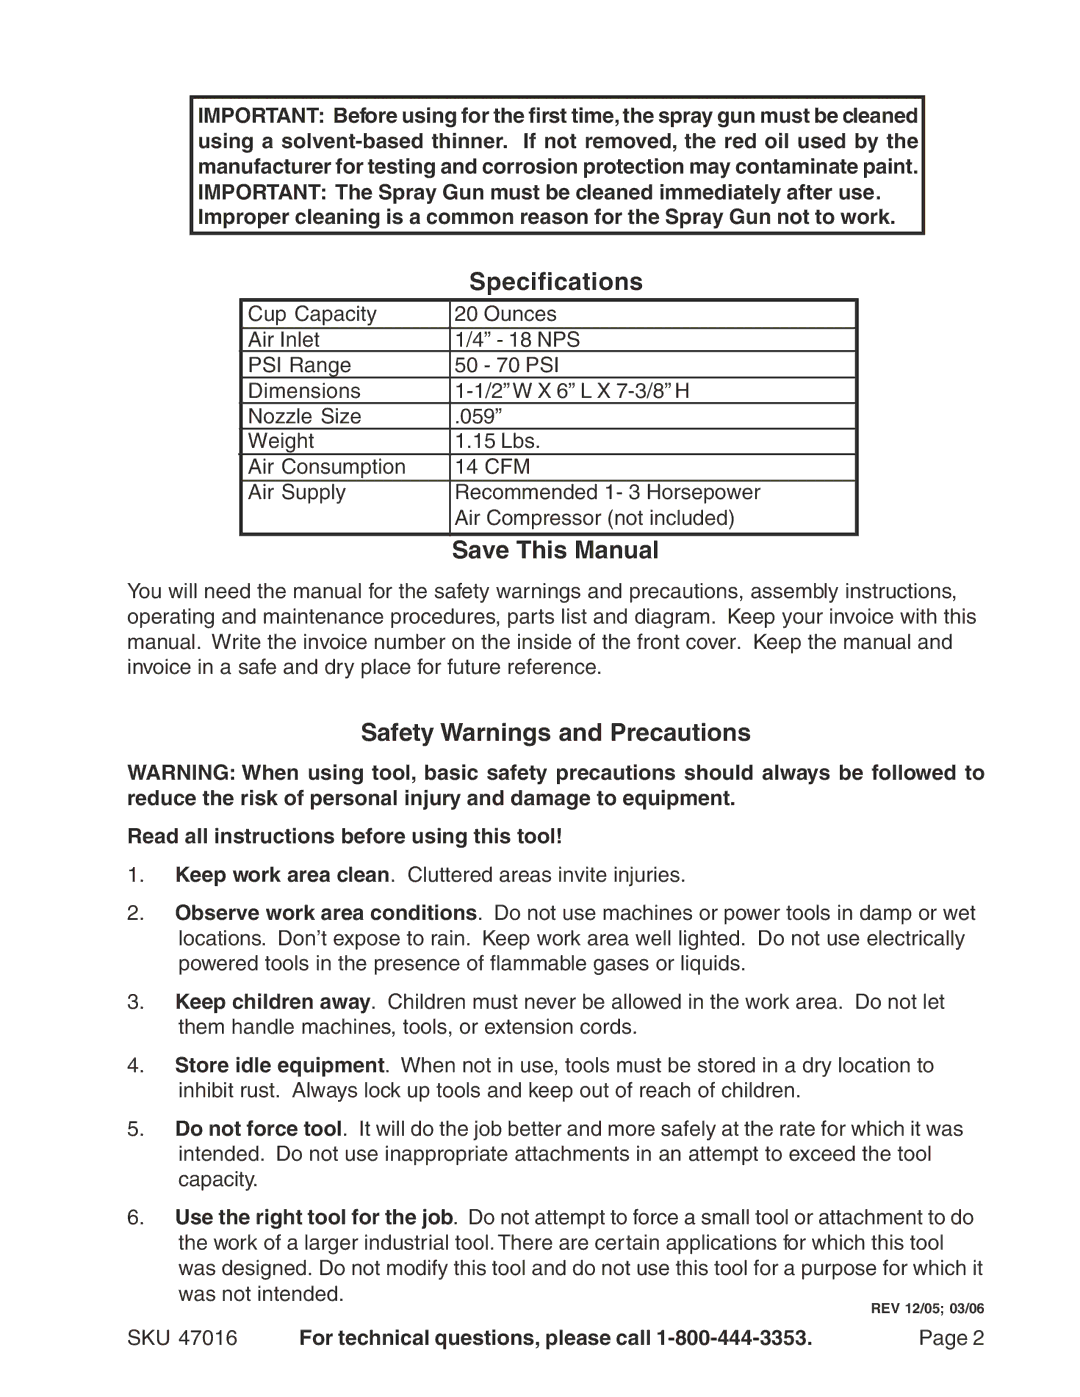 Harbor Freight Tools 47016 operating instructions Specifications, Save This Manual, Safety Warnings and Precautions 